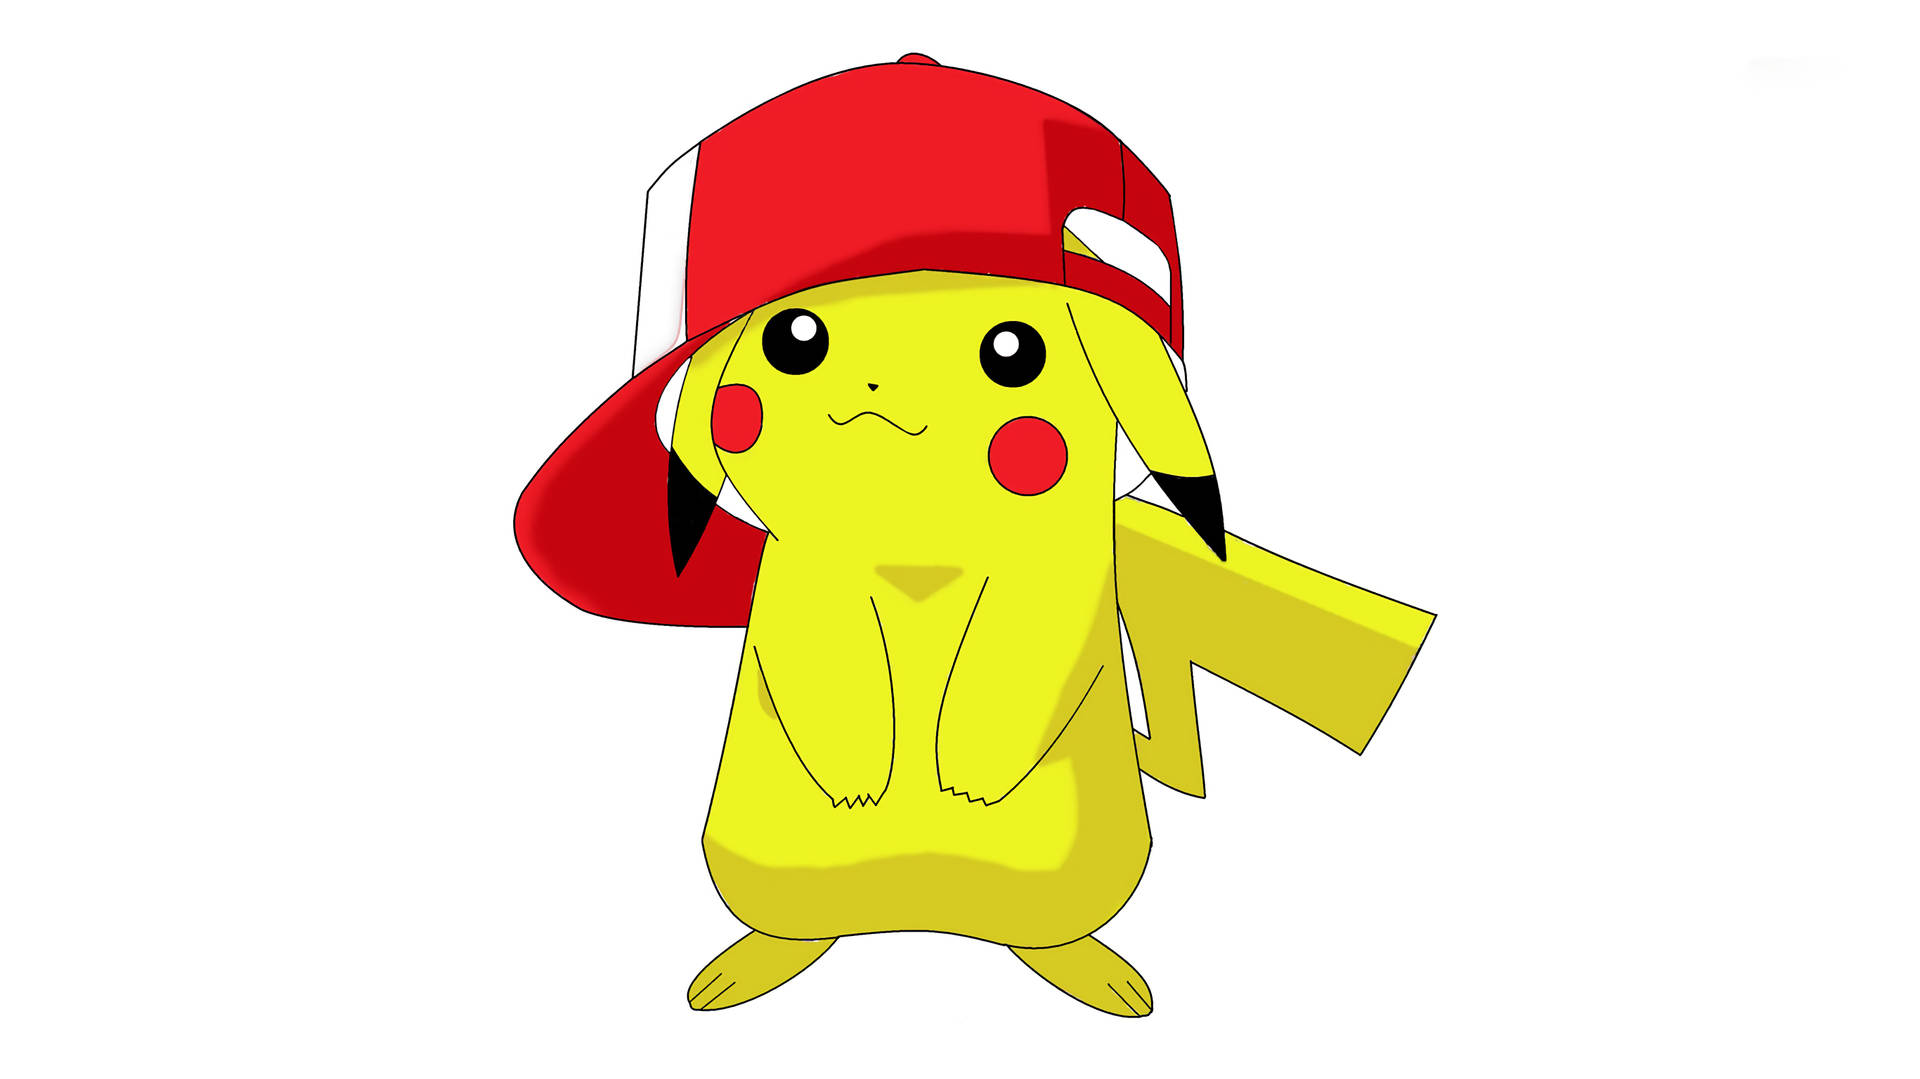 Cool Pokemon Pikachu With Red Hat Picture